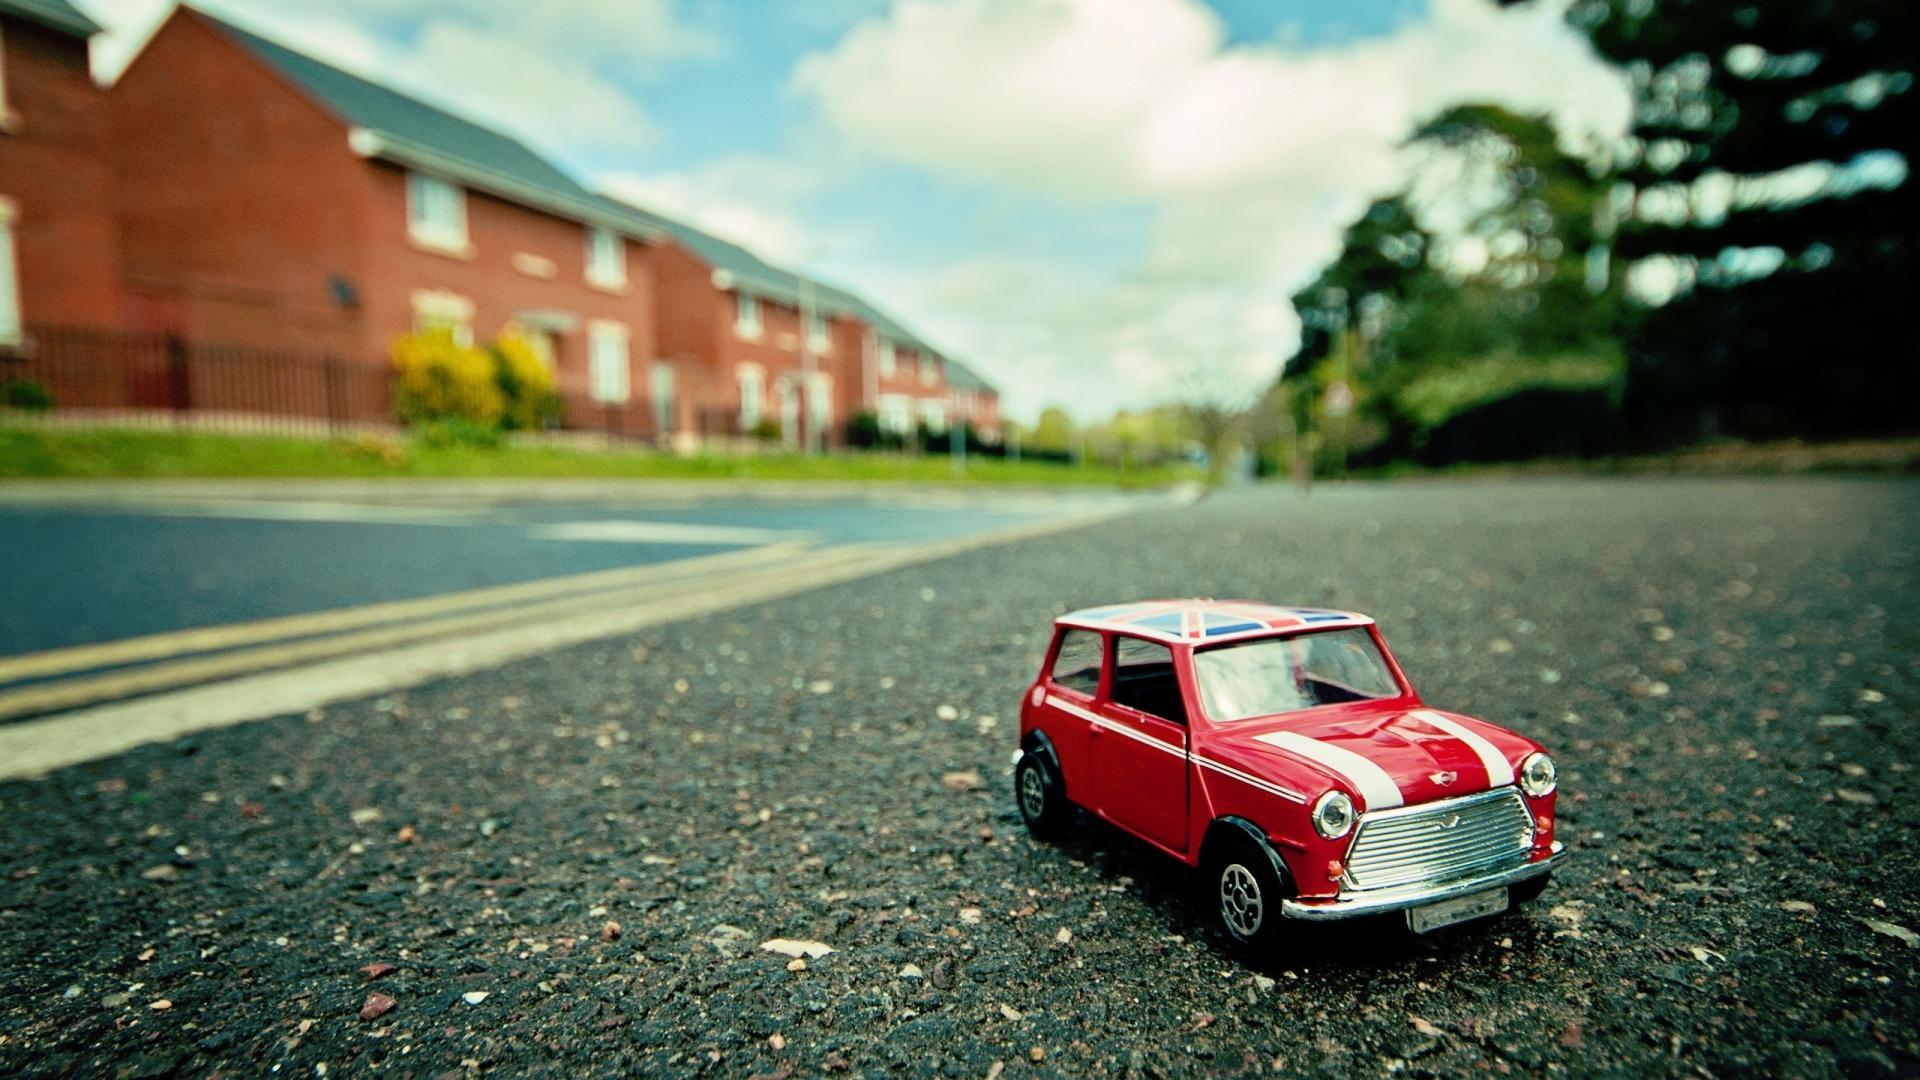 Miniature Photos, Download The BEST Free Miniature Stock Photos & HD Images